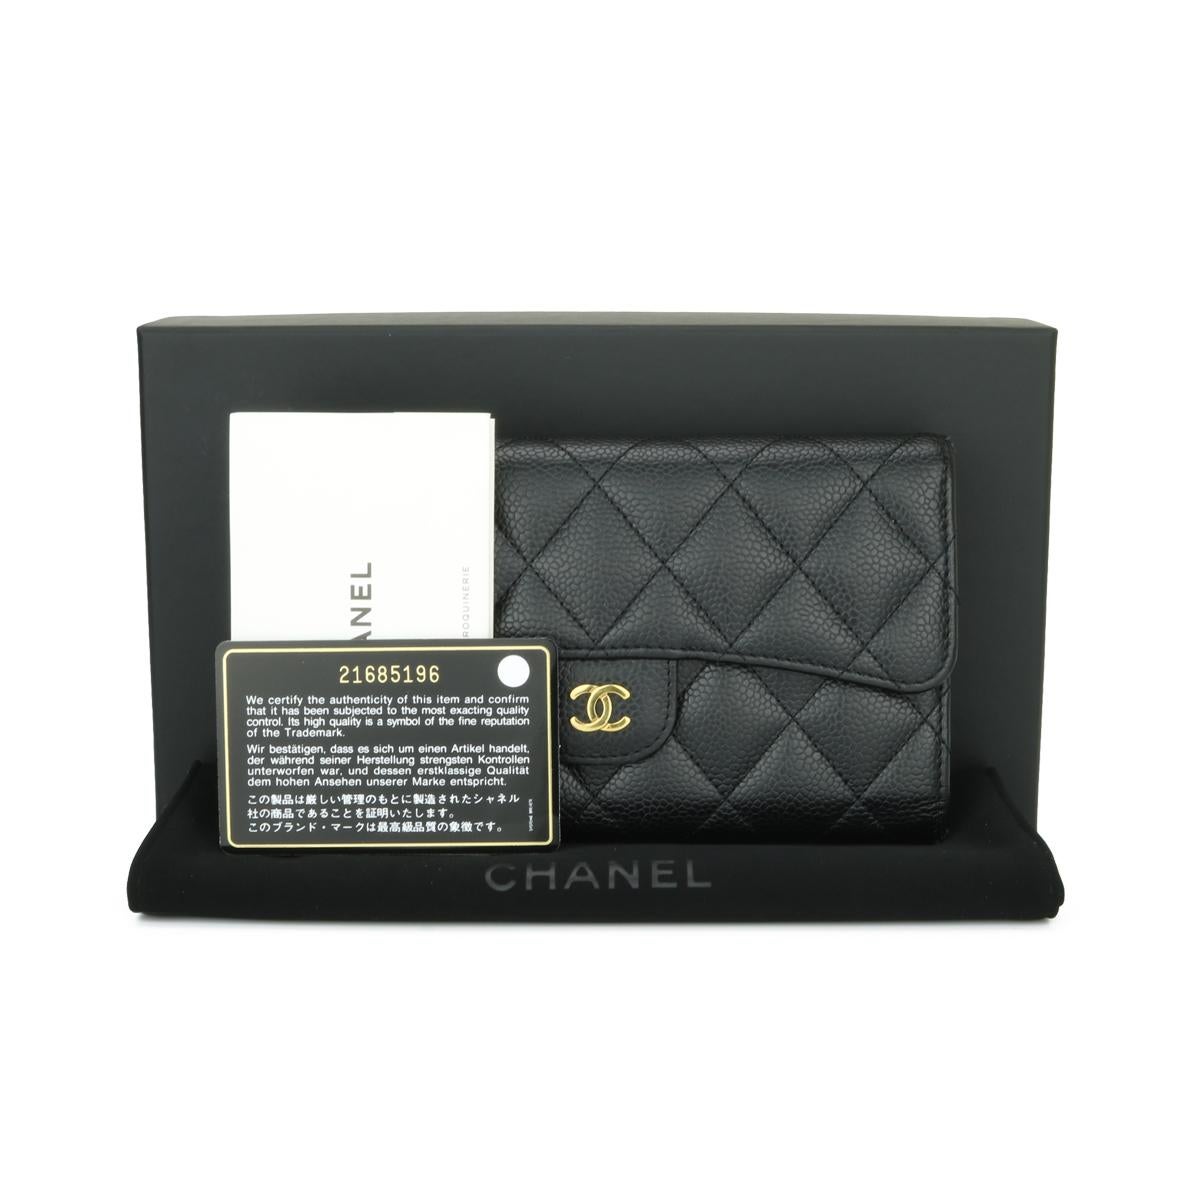 CHANEL Classic Continental Long Flap Wallet Black Caviar with Gold Hardware 2016.

This stunning classic long flap wallet is in excellent condition, the wallet still holds its original shape, and the hardware is still very shiny.

- Exterior